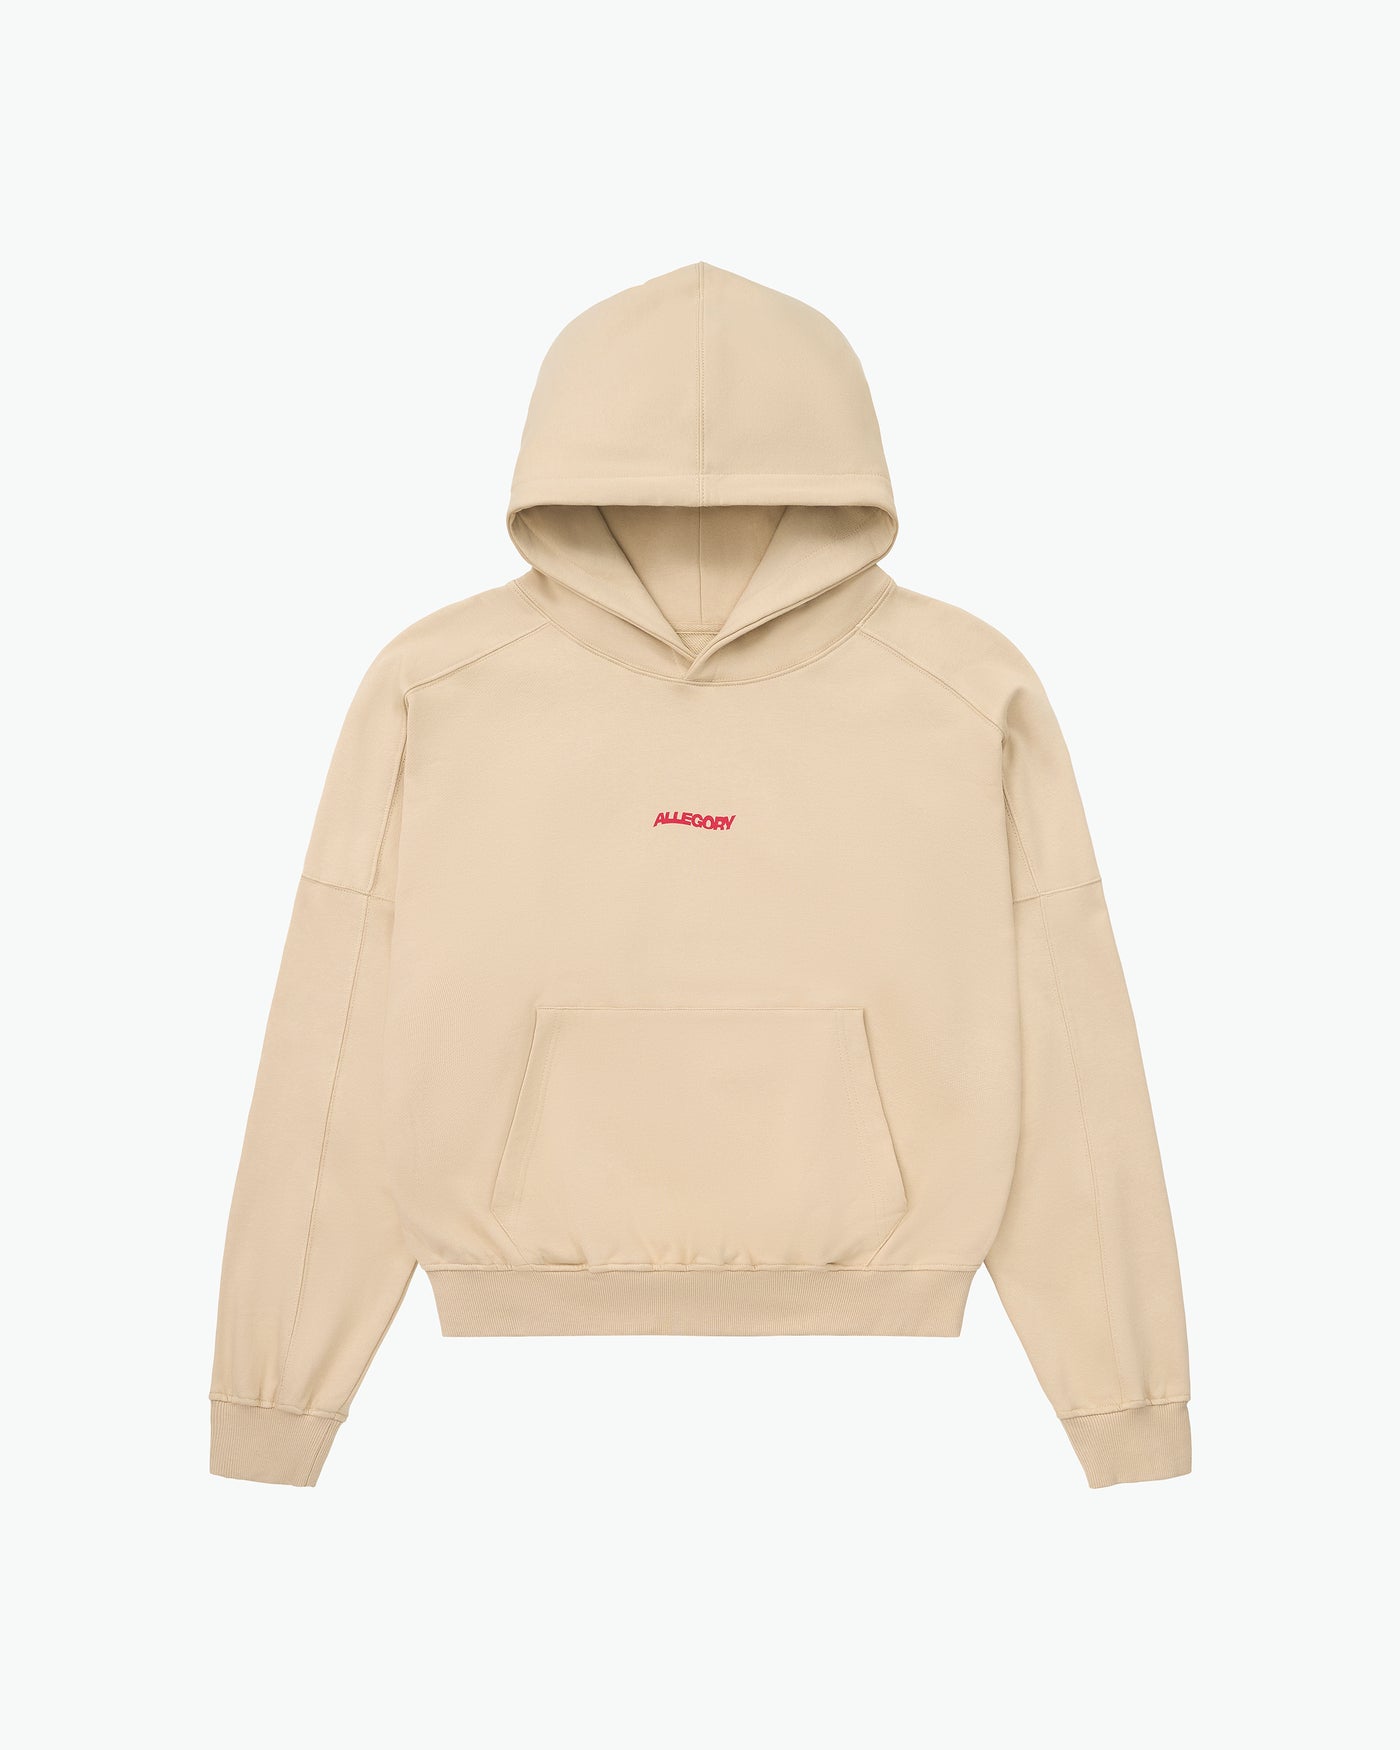 Masters Of Masters Heavyweight Hoodie / Sand / Blue / Red